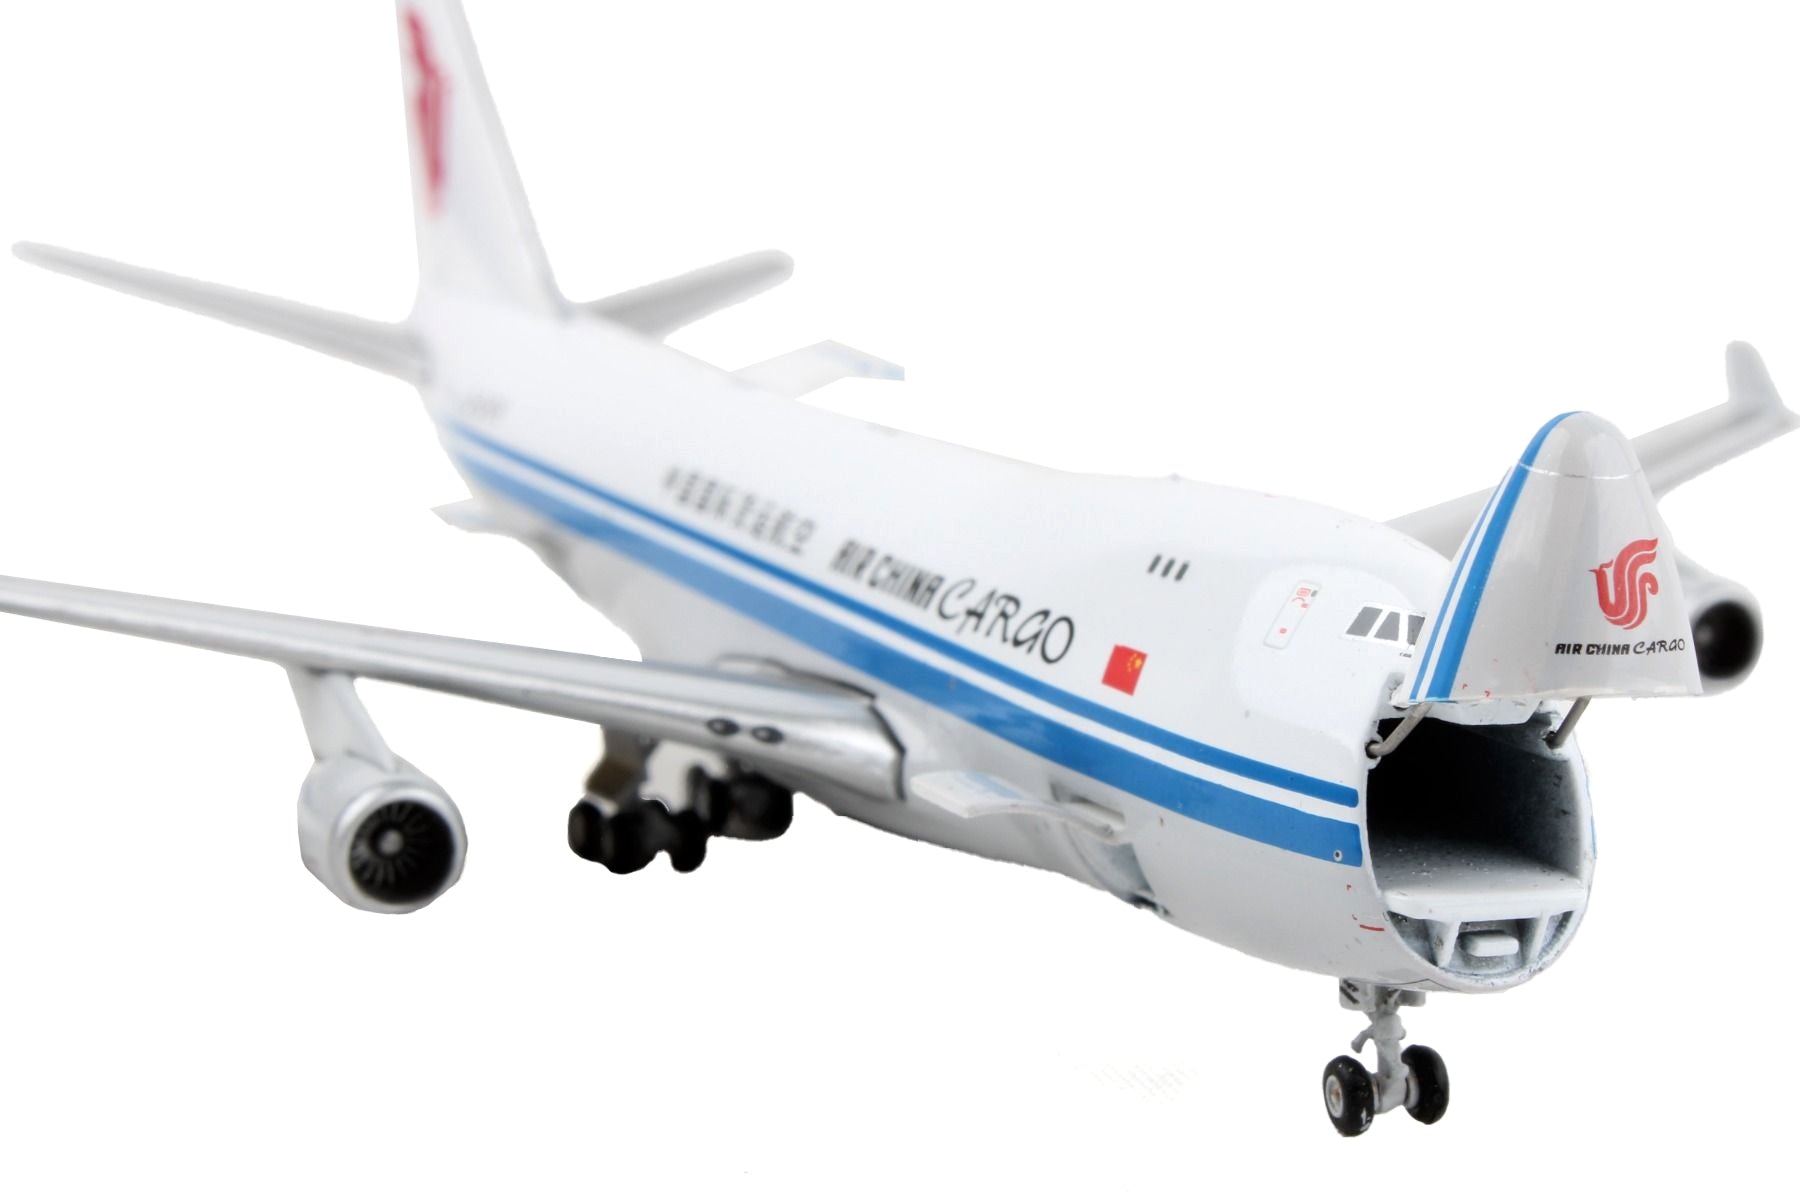 Boeing 747-400F Commercial Aircraft "Air China Cargo" White with Blue Stripes "Interactive Series" 1/400 Diecast Model Airplane by GeminiJets